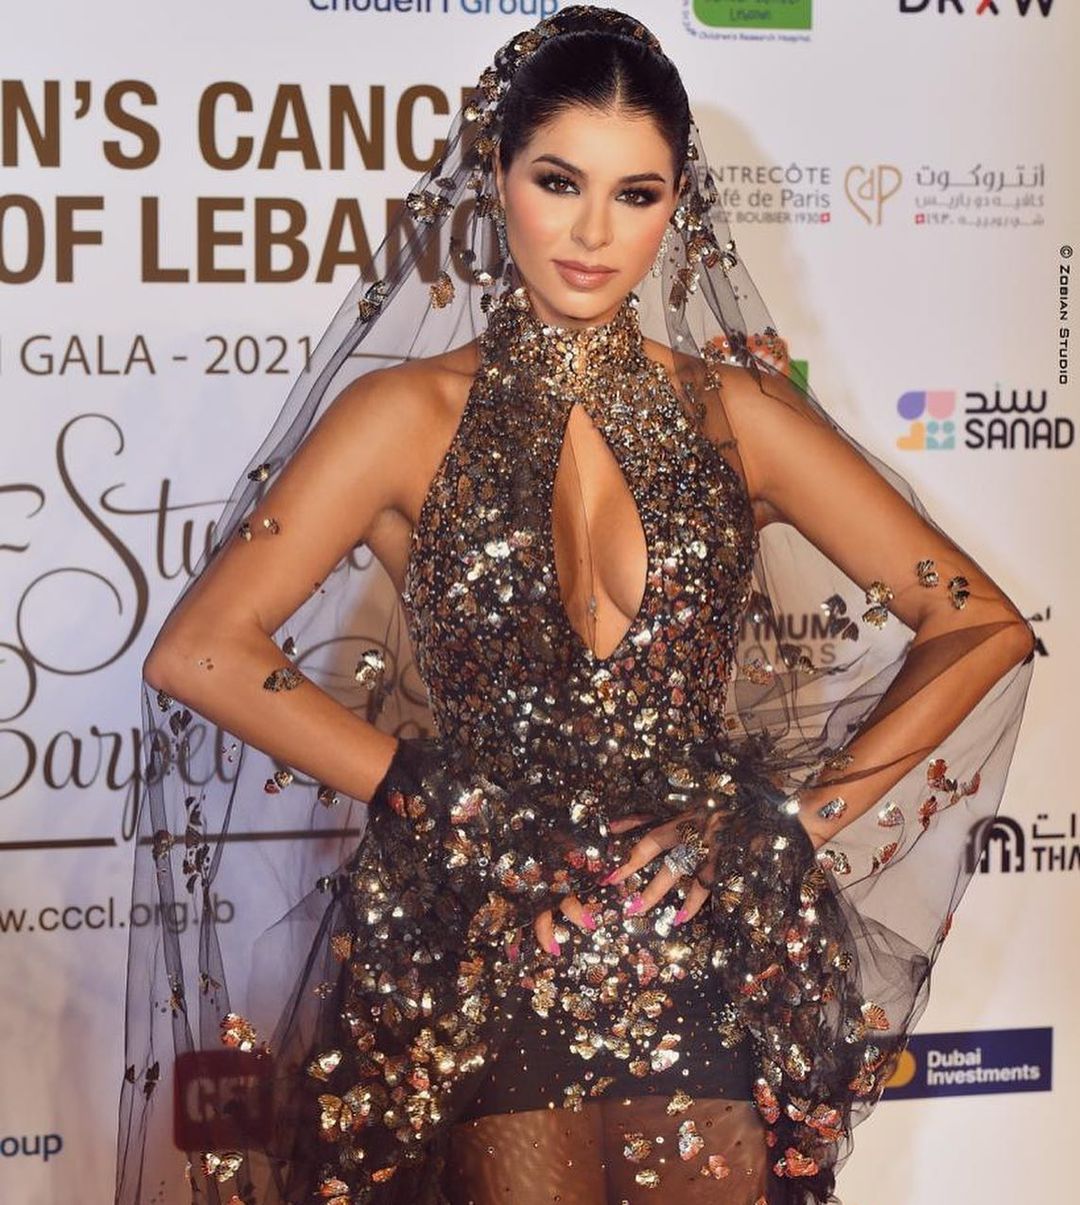 Helped Organize The Star Studded Gala In Dubai, Supporting The Children's Cancer Center Of Lebanon